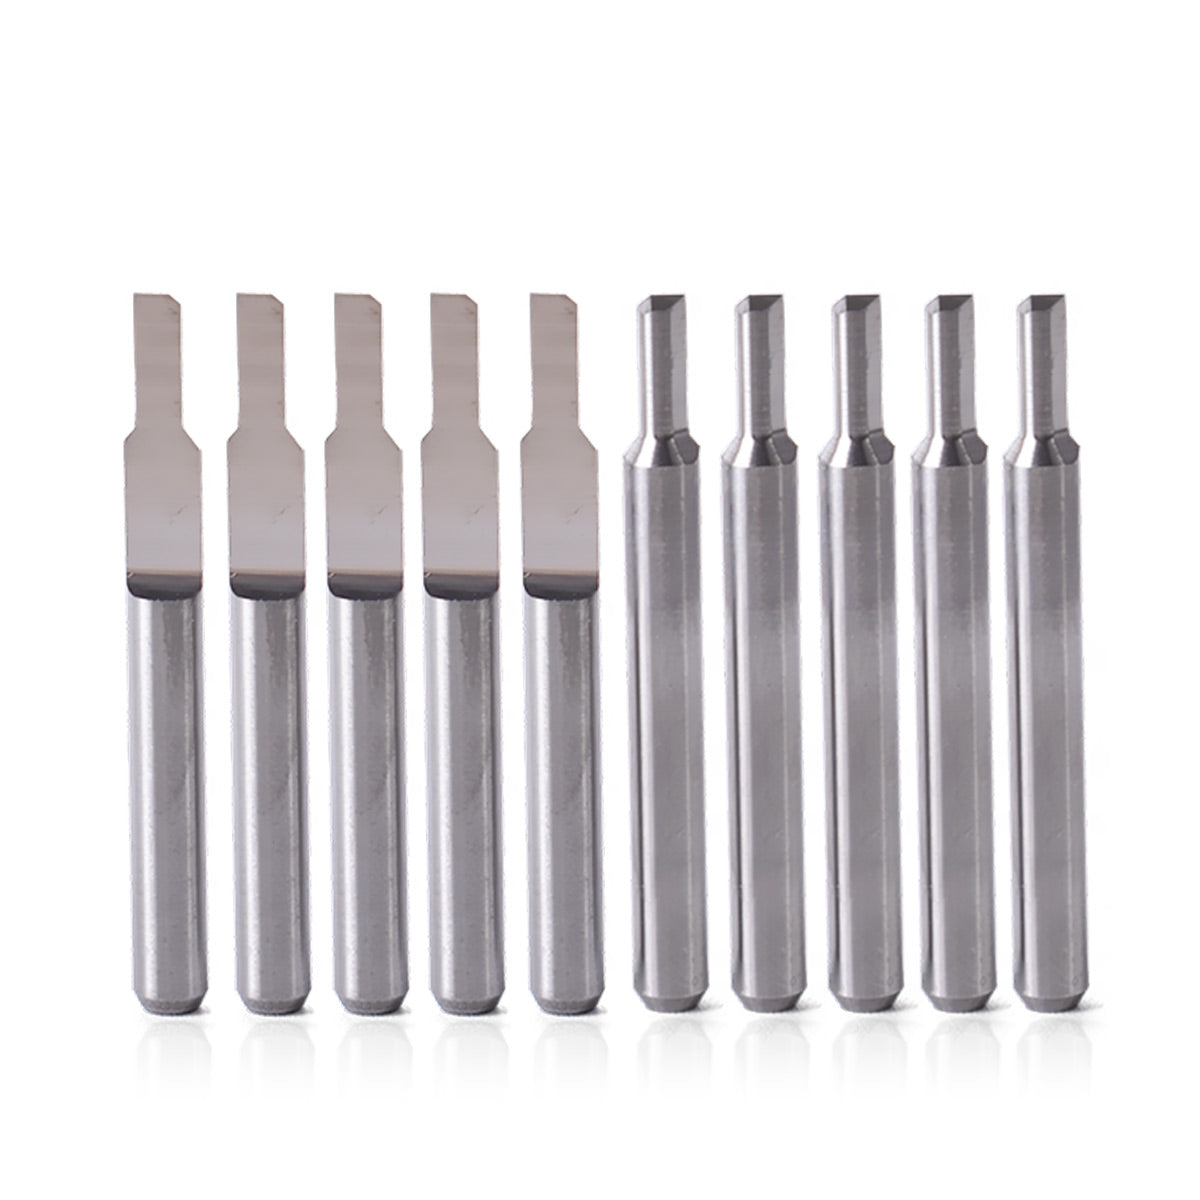 Startnow 10PCS Engraving Bit PCB 3.175mm Shank Parallel Bits Milling Cutters Solid Carbide Semi-Open One Edge Straight End Mill